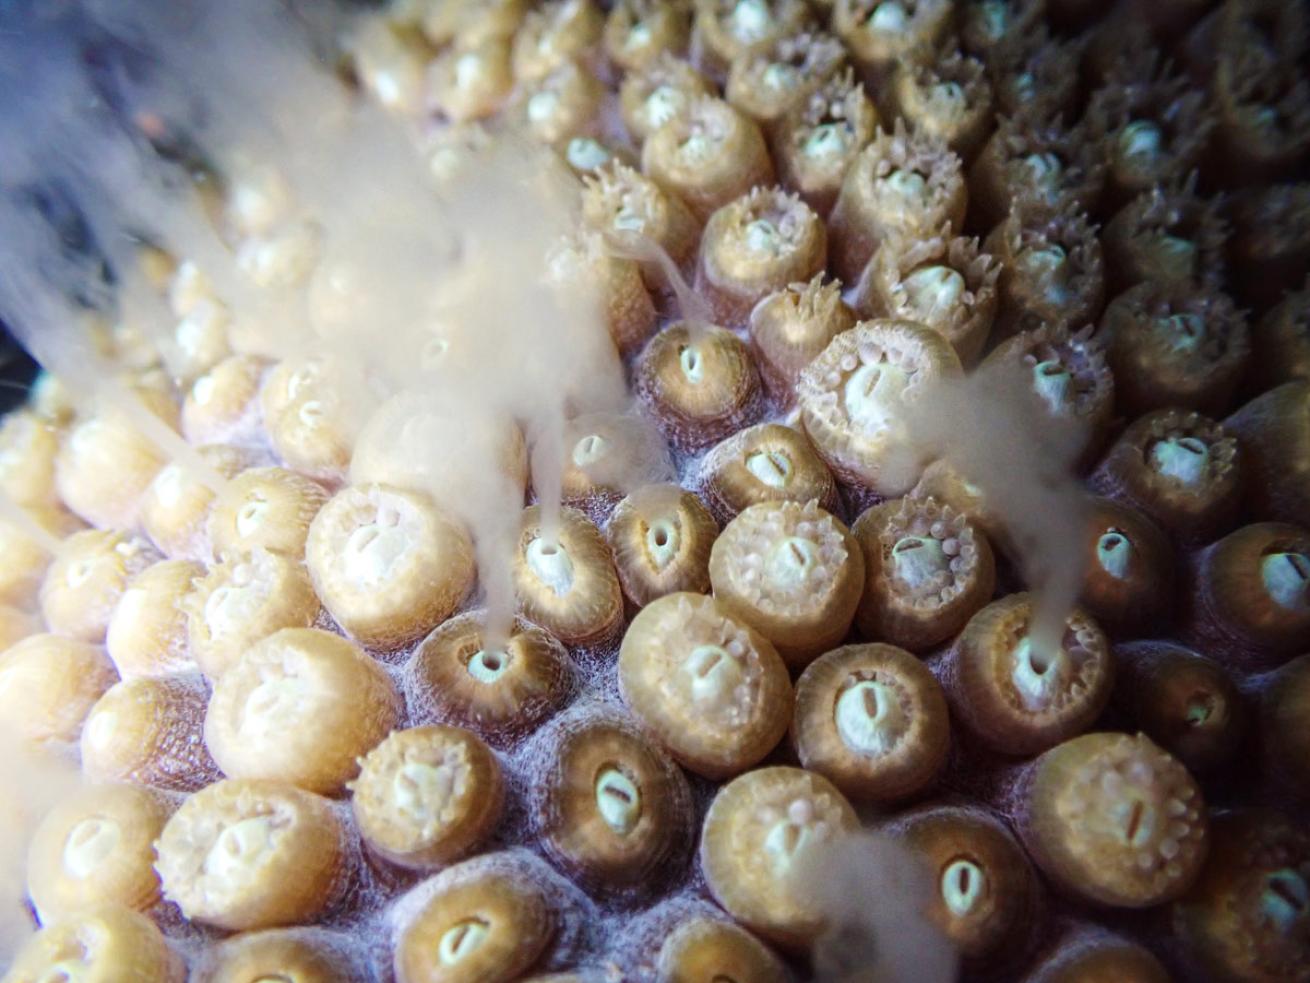 Star coral spawning in Curaçao